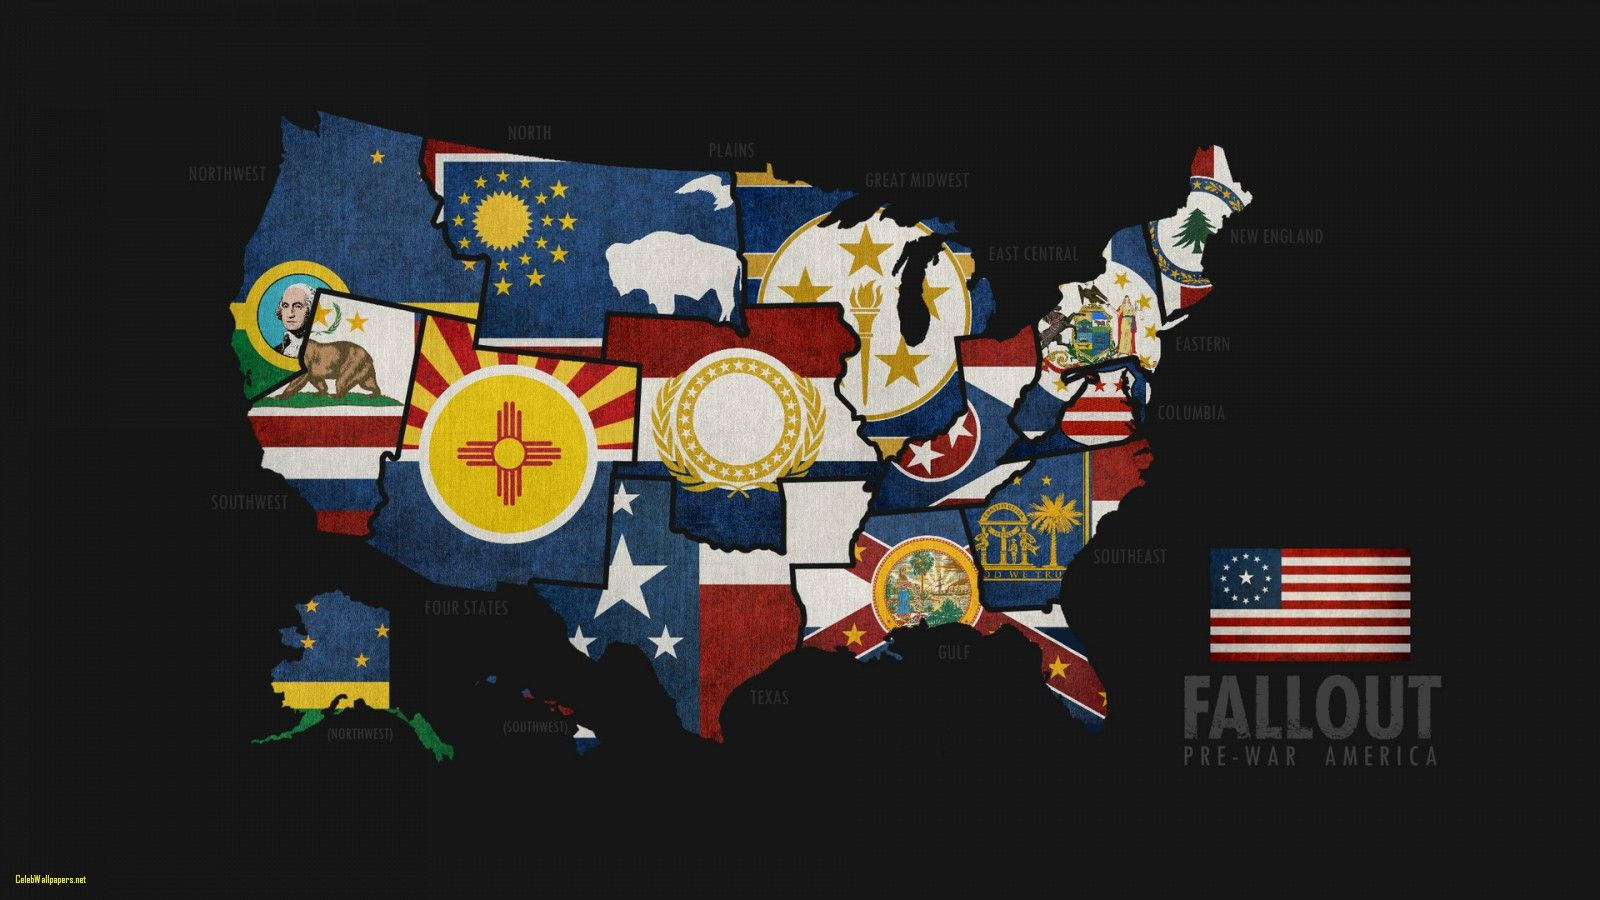 Fallout Map Of Pre-war America Background